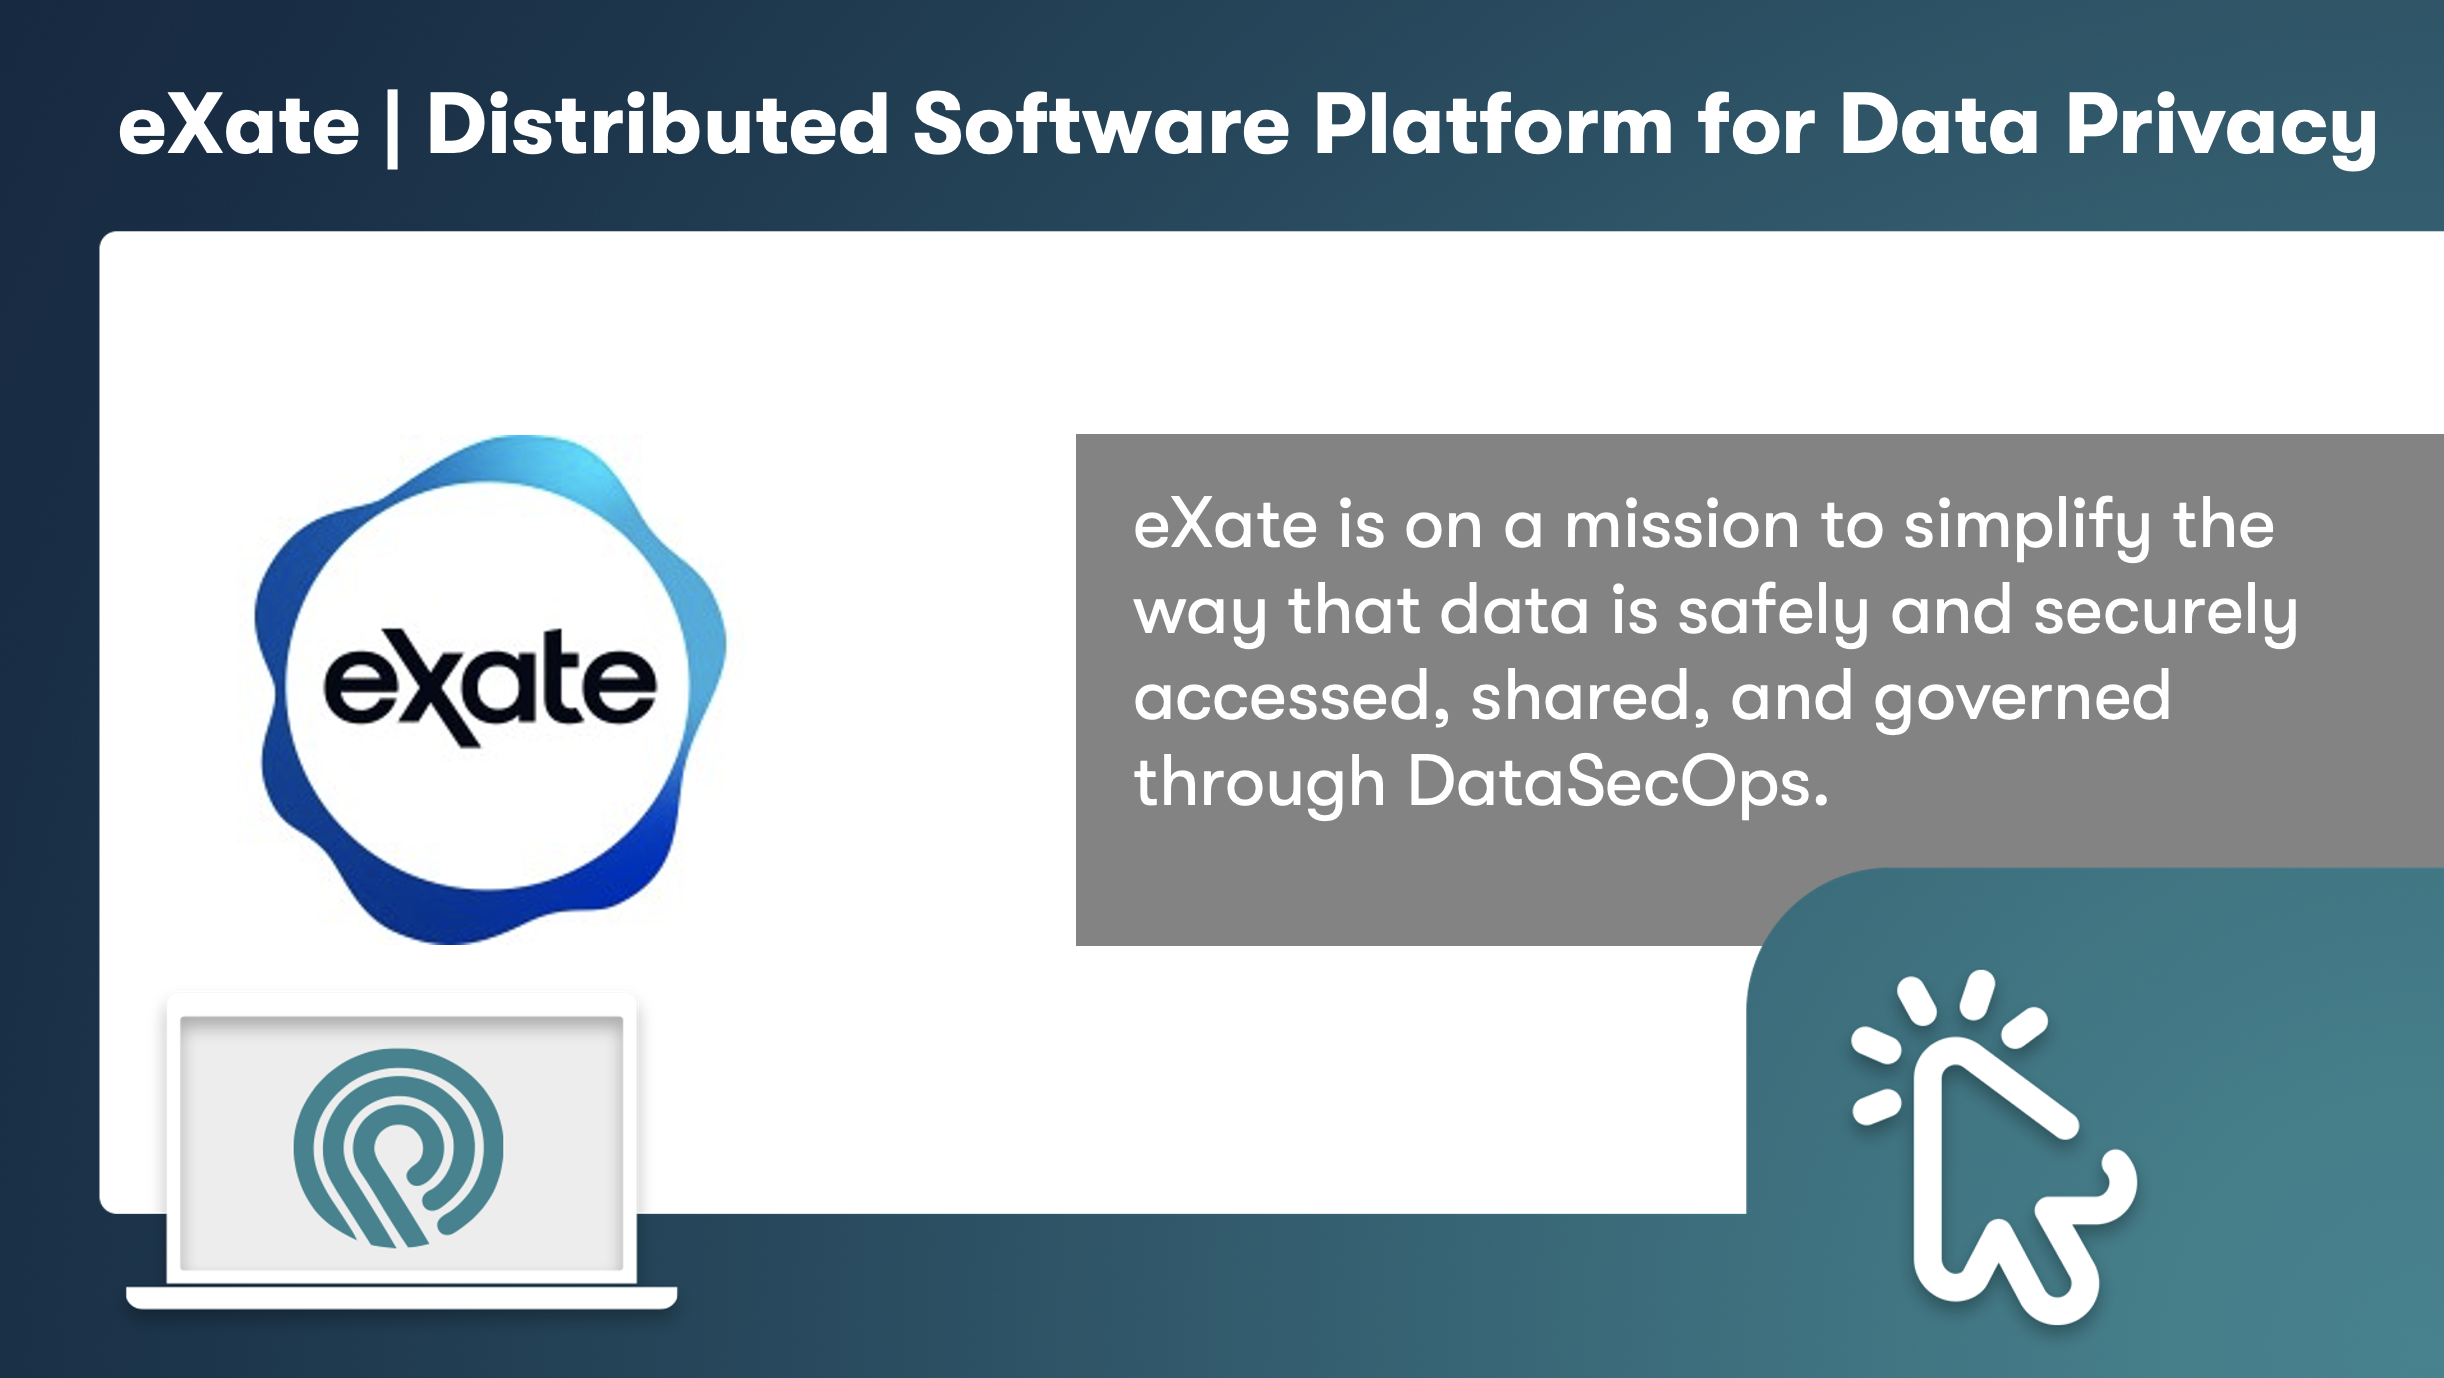 eXate | Distributed Software Platform for Data Privacy